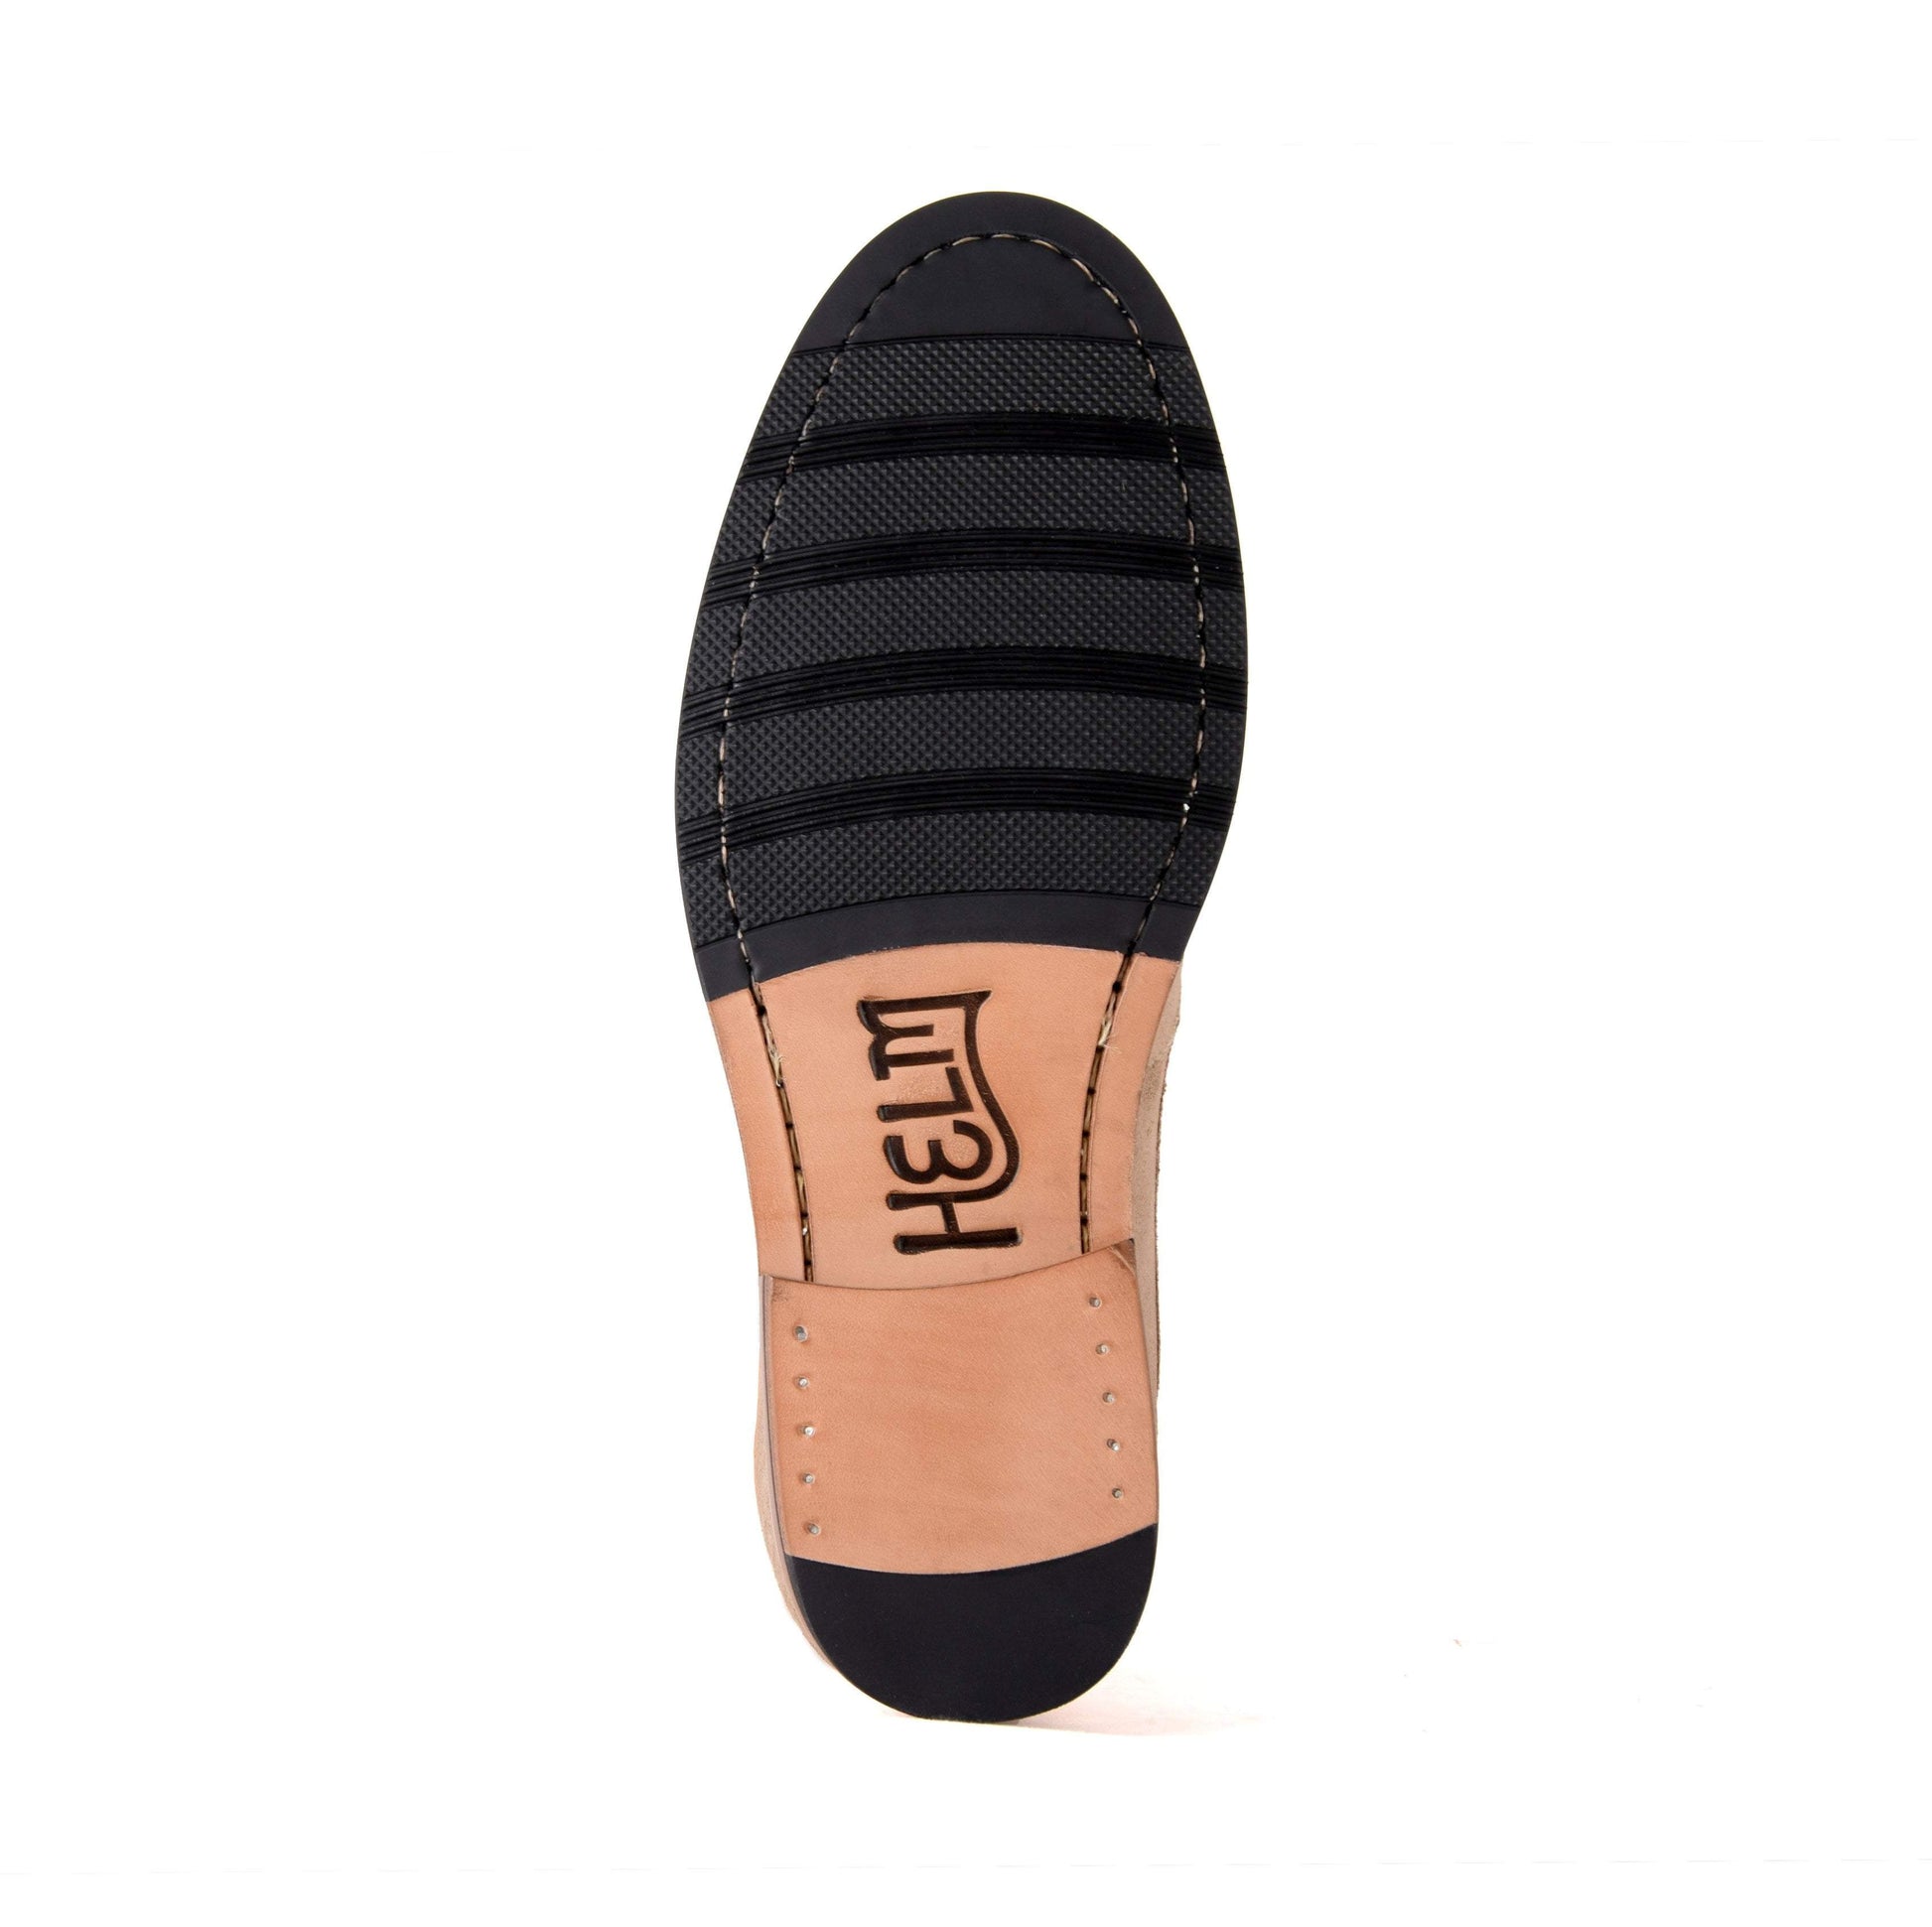 HELM Shoes The Wilson Tan